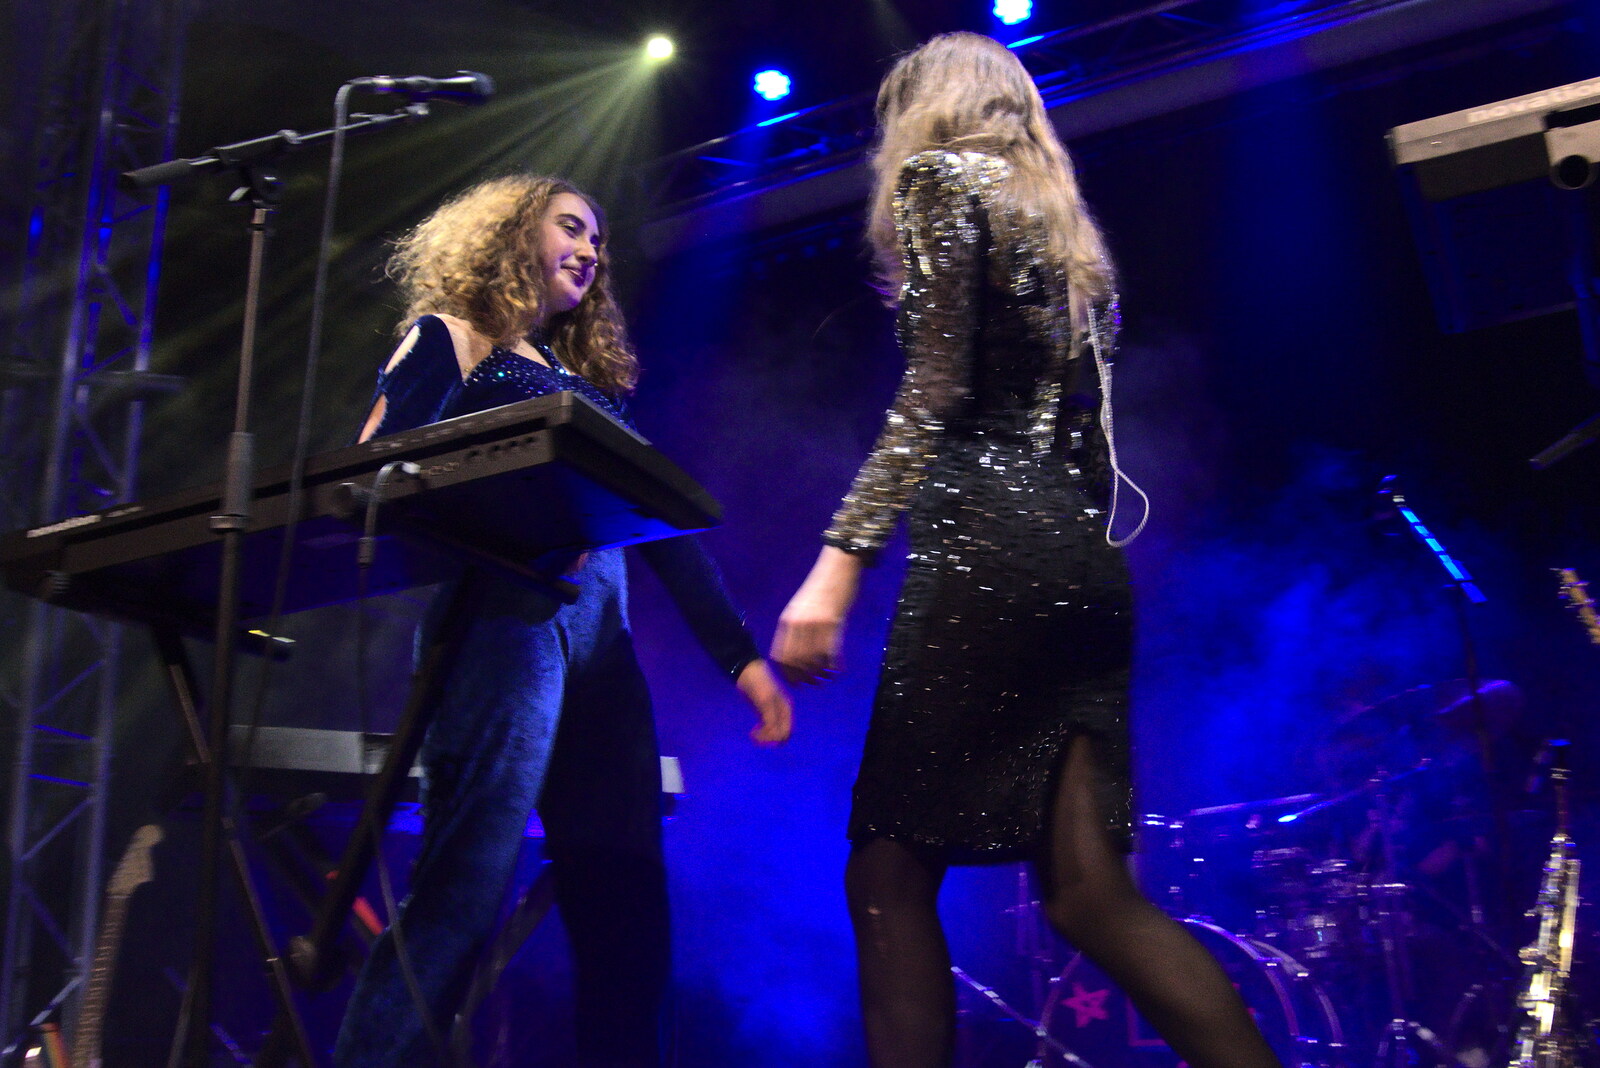 Vanity Fairy and Let's Eat Grandma, Arts Centre, Norwich - 26th January 2022: The pair meet up on stage